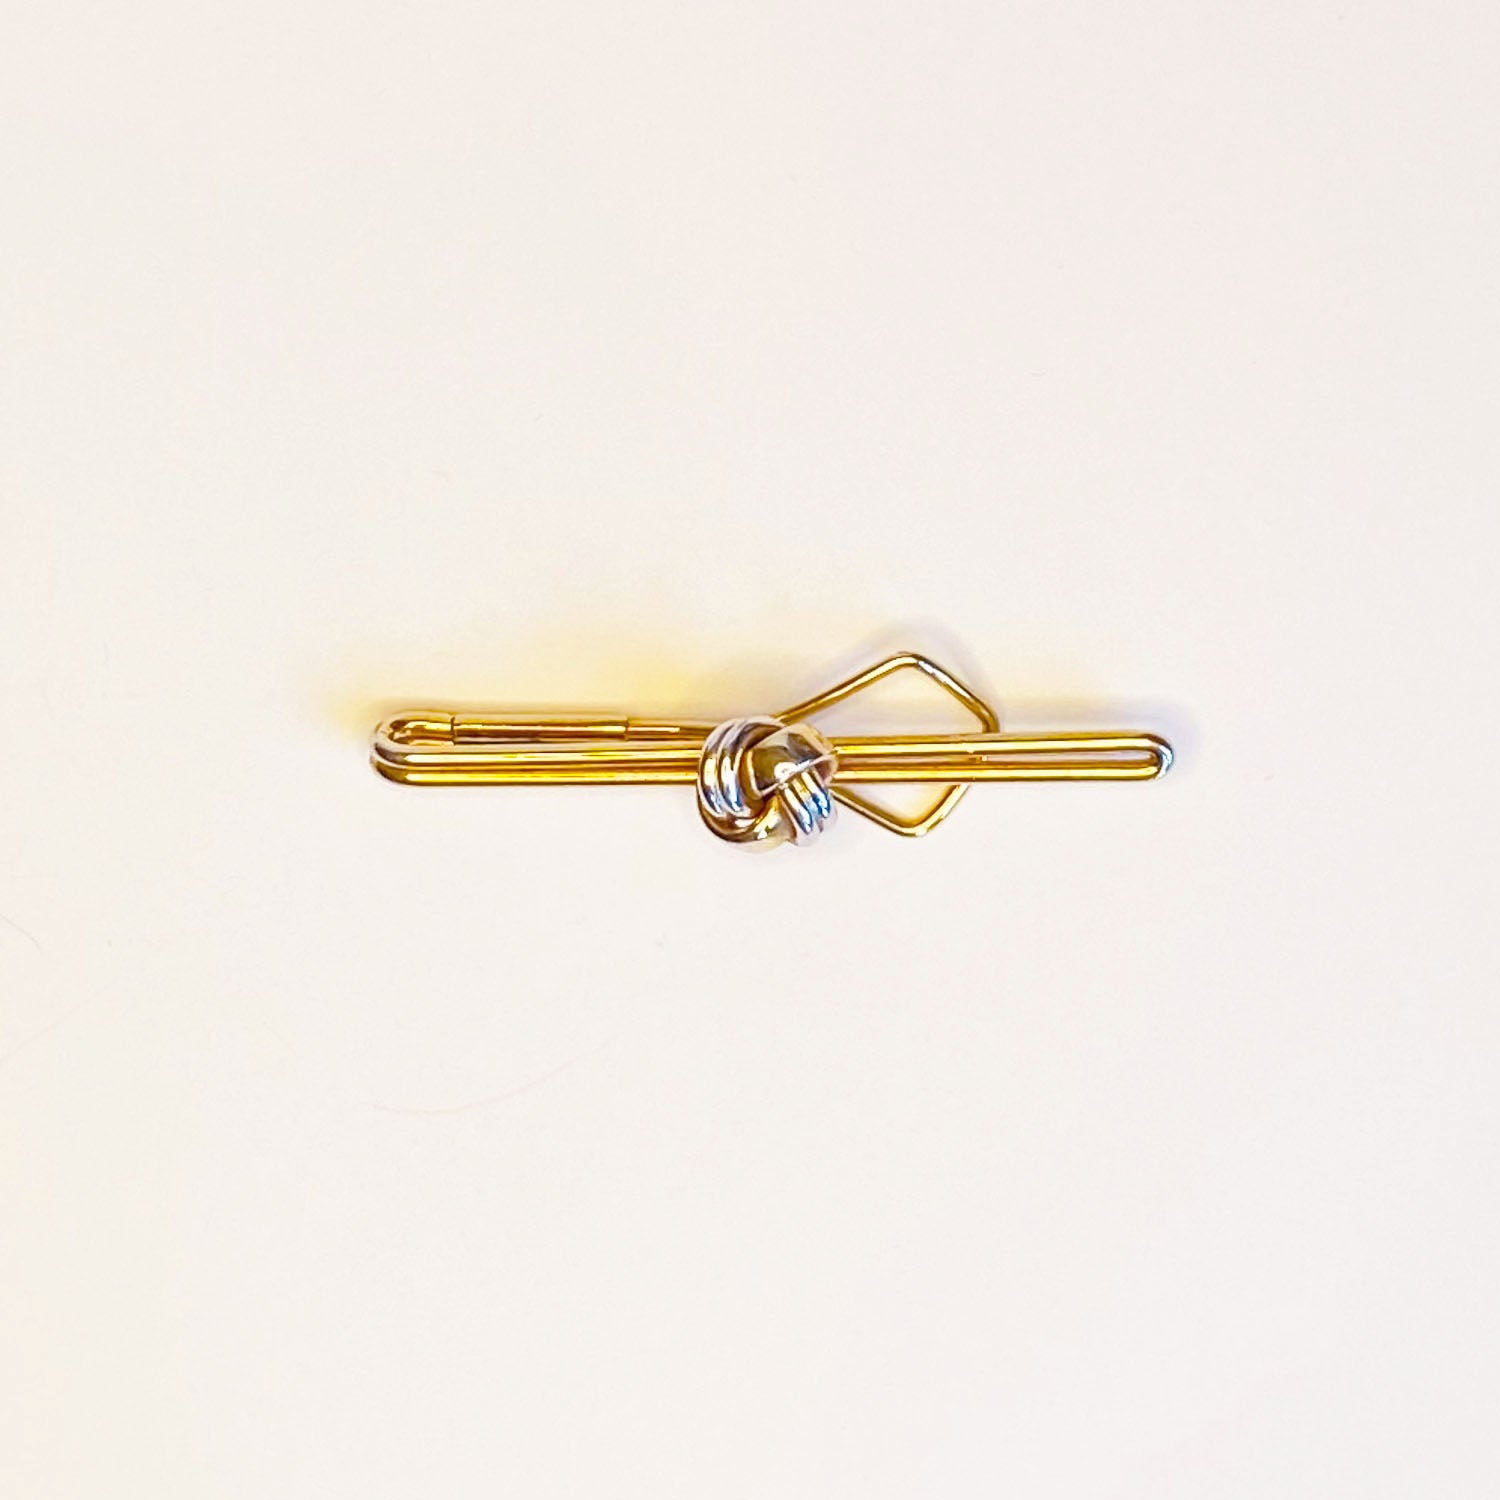 40's Swank Gold & Silver Tone Knot Tie Bar